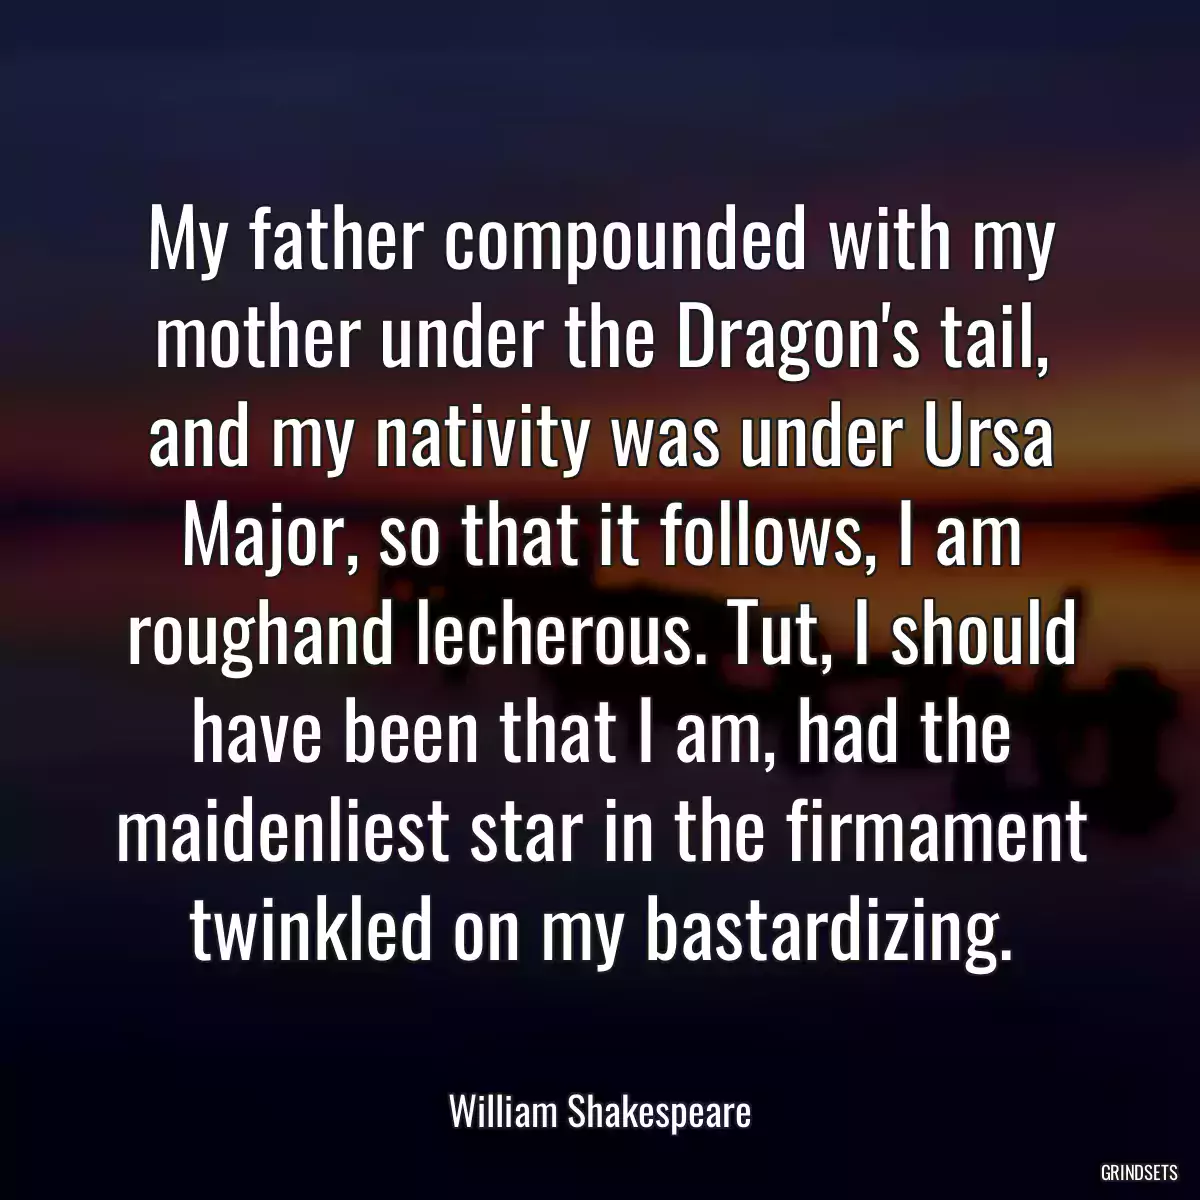 My father compounded with my mother under the Dragon\'s tail, and my nativity was under Ursa Major, so that it follows, I am roughand lecherous. Tut, I should have been that I am, had the maidenliest star in the firmament twinkled on my bastardizing.